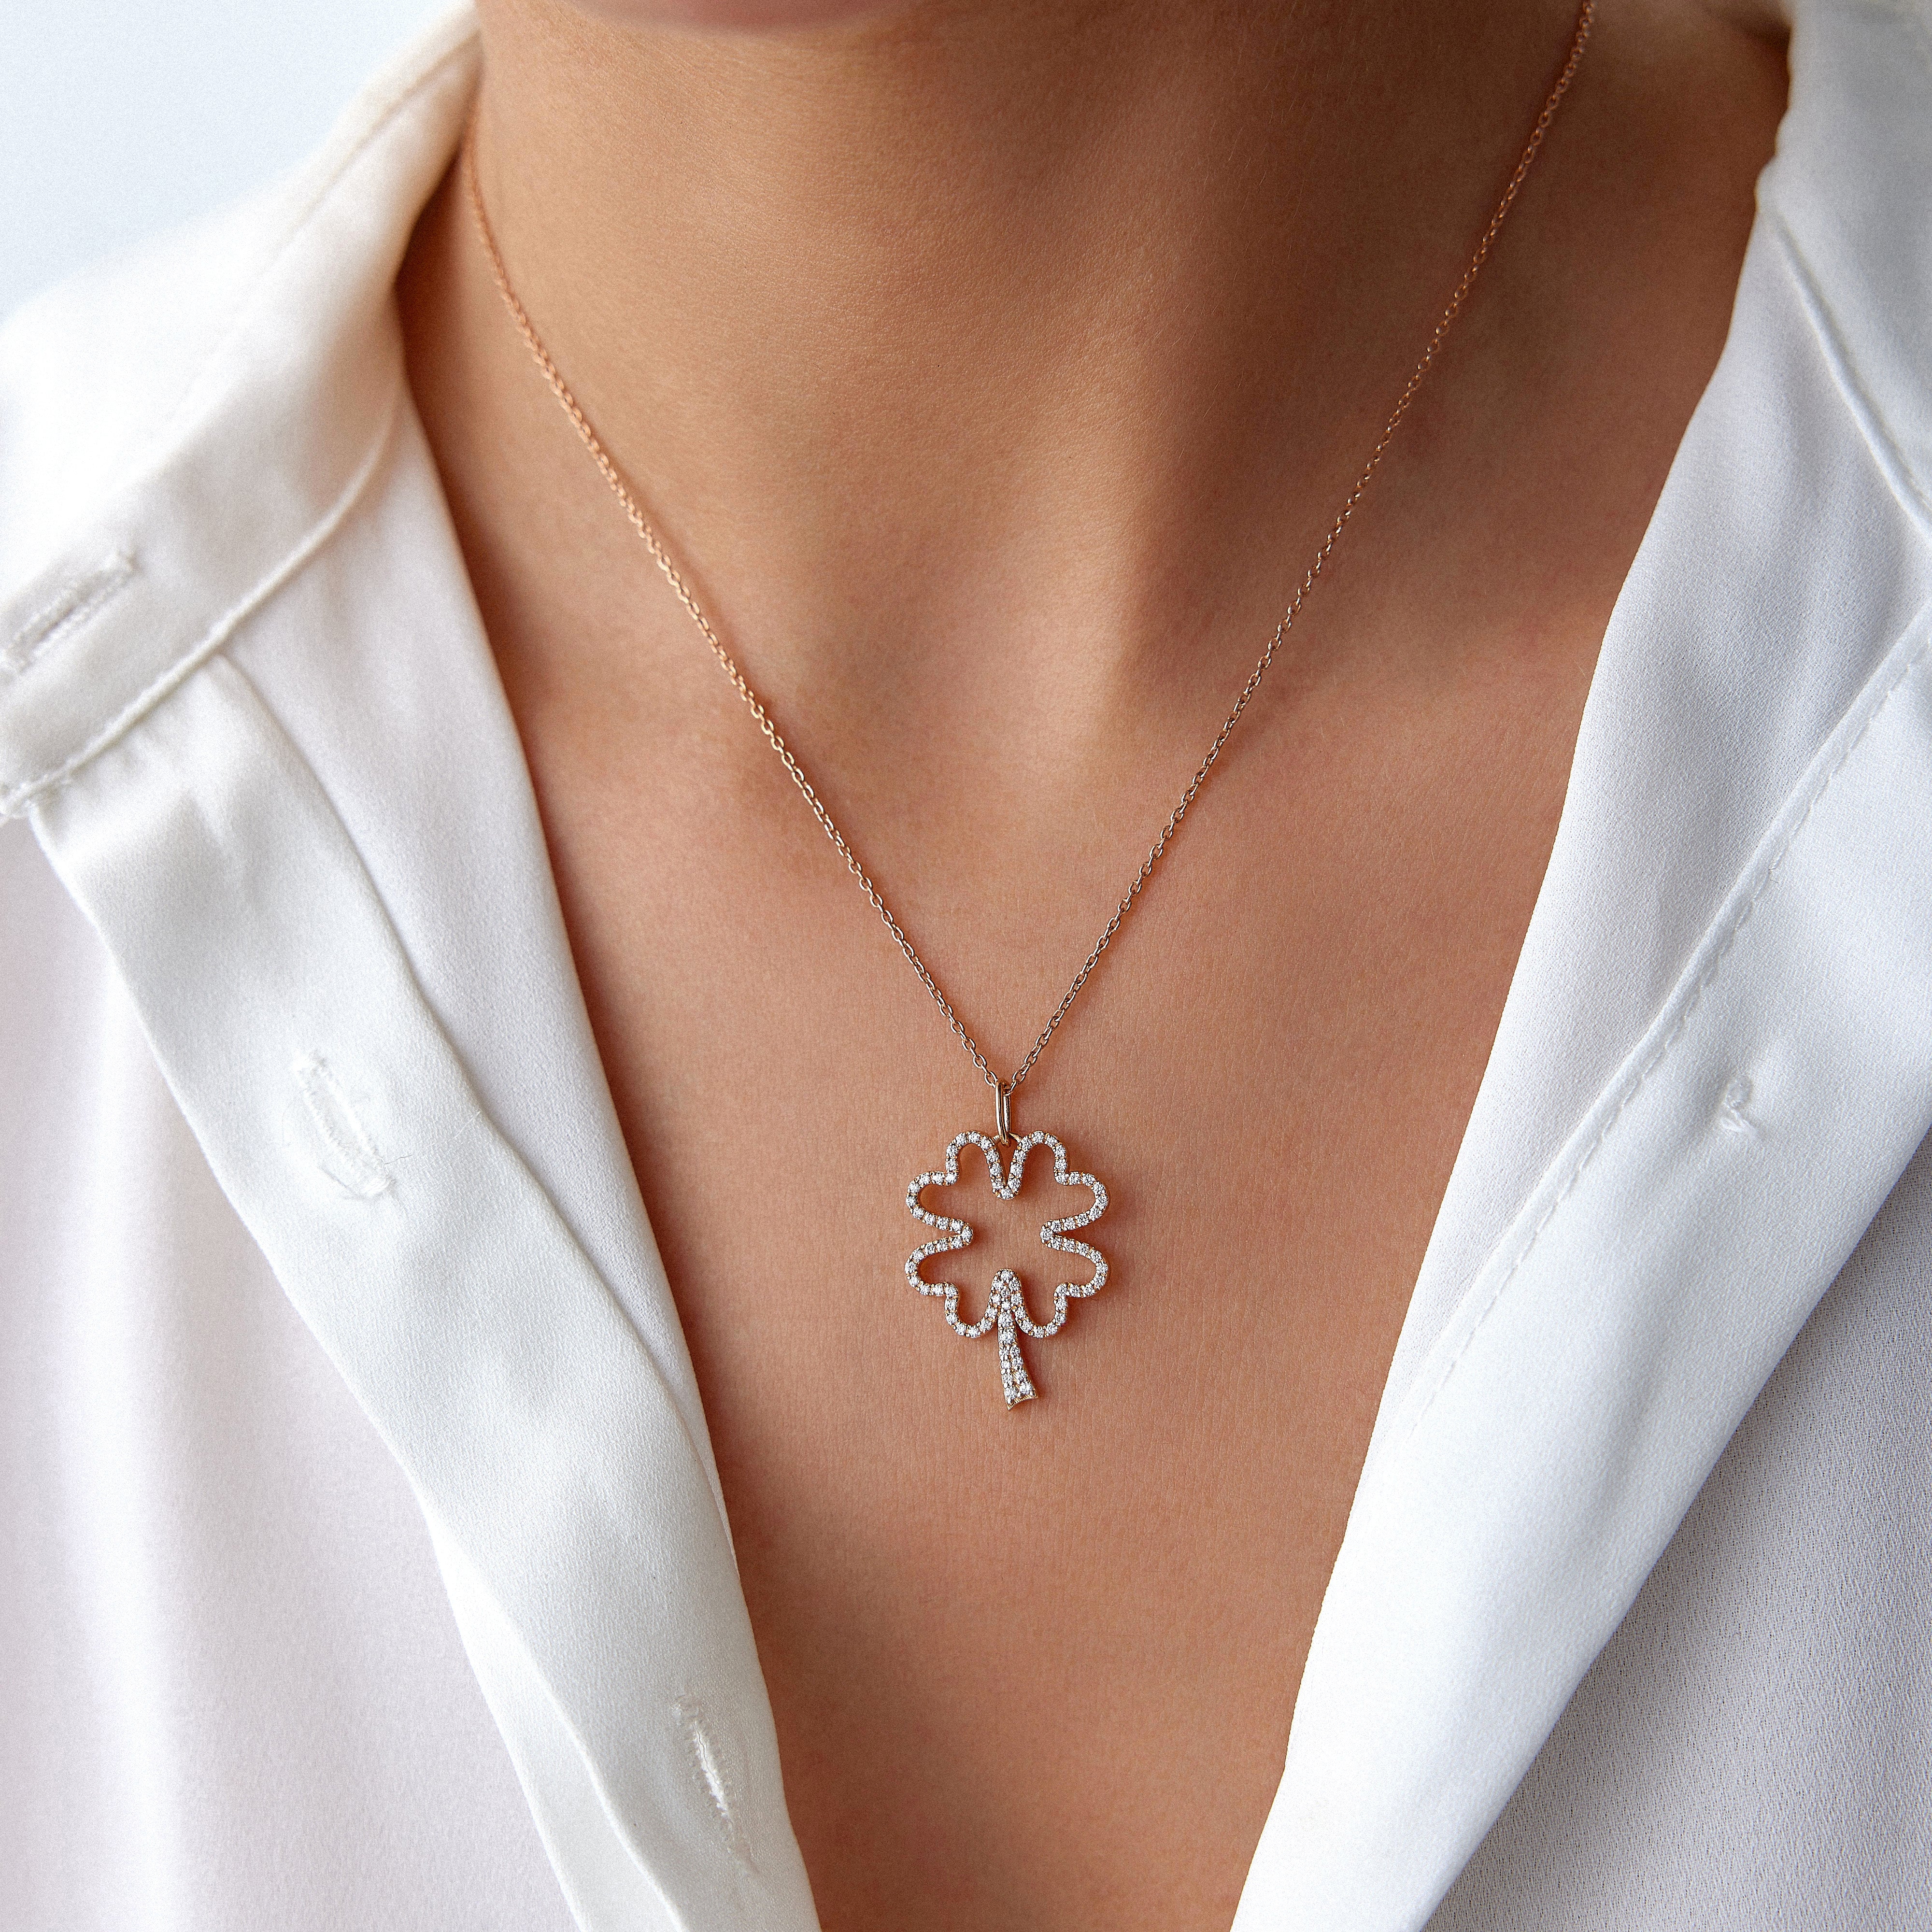 Diamond Open Clover Necklace Available in 14K and 18K Gold / FORTUNA